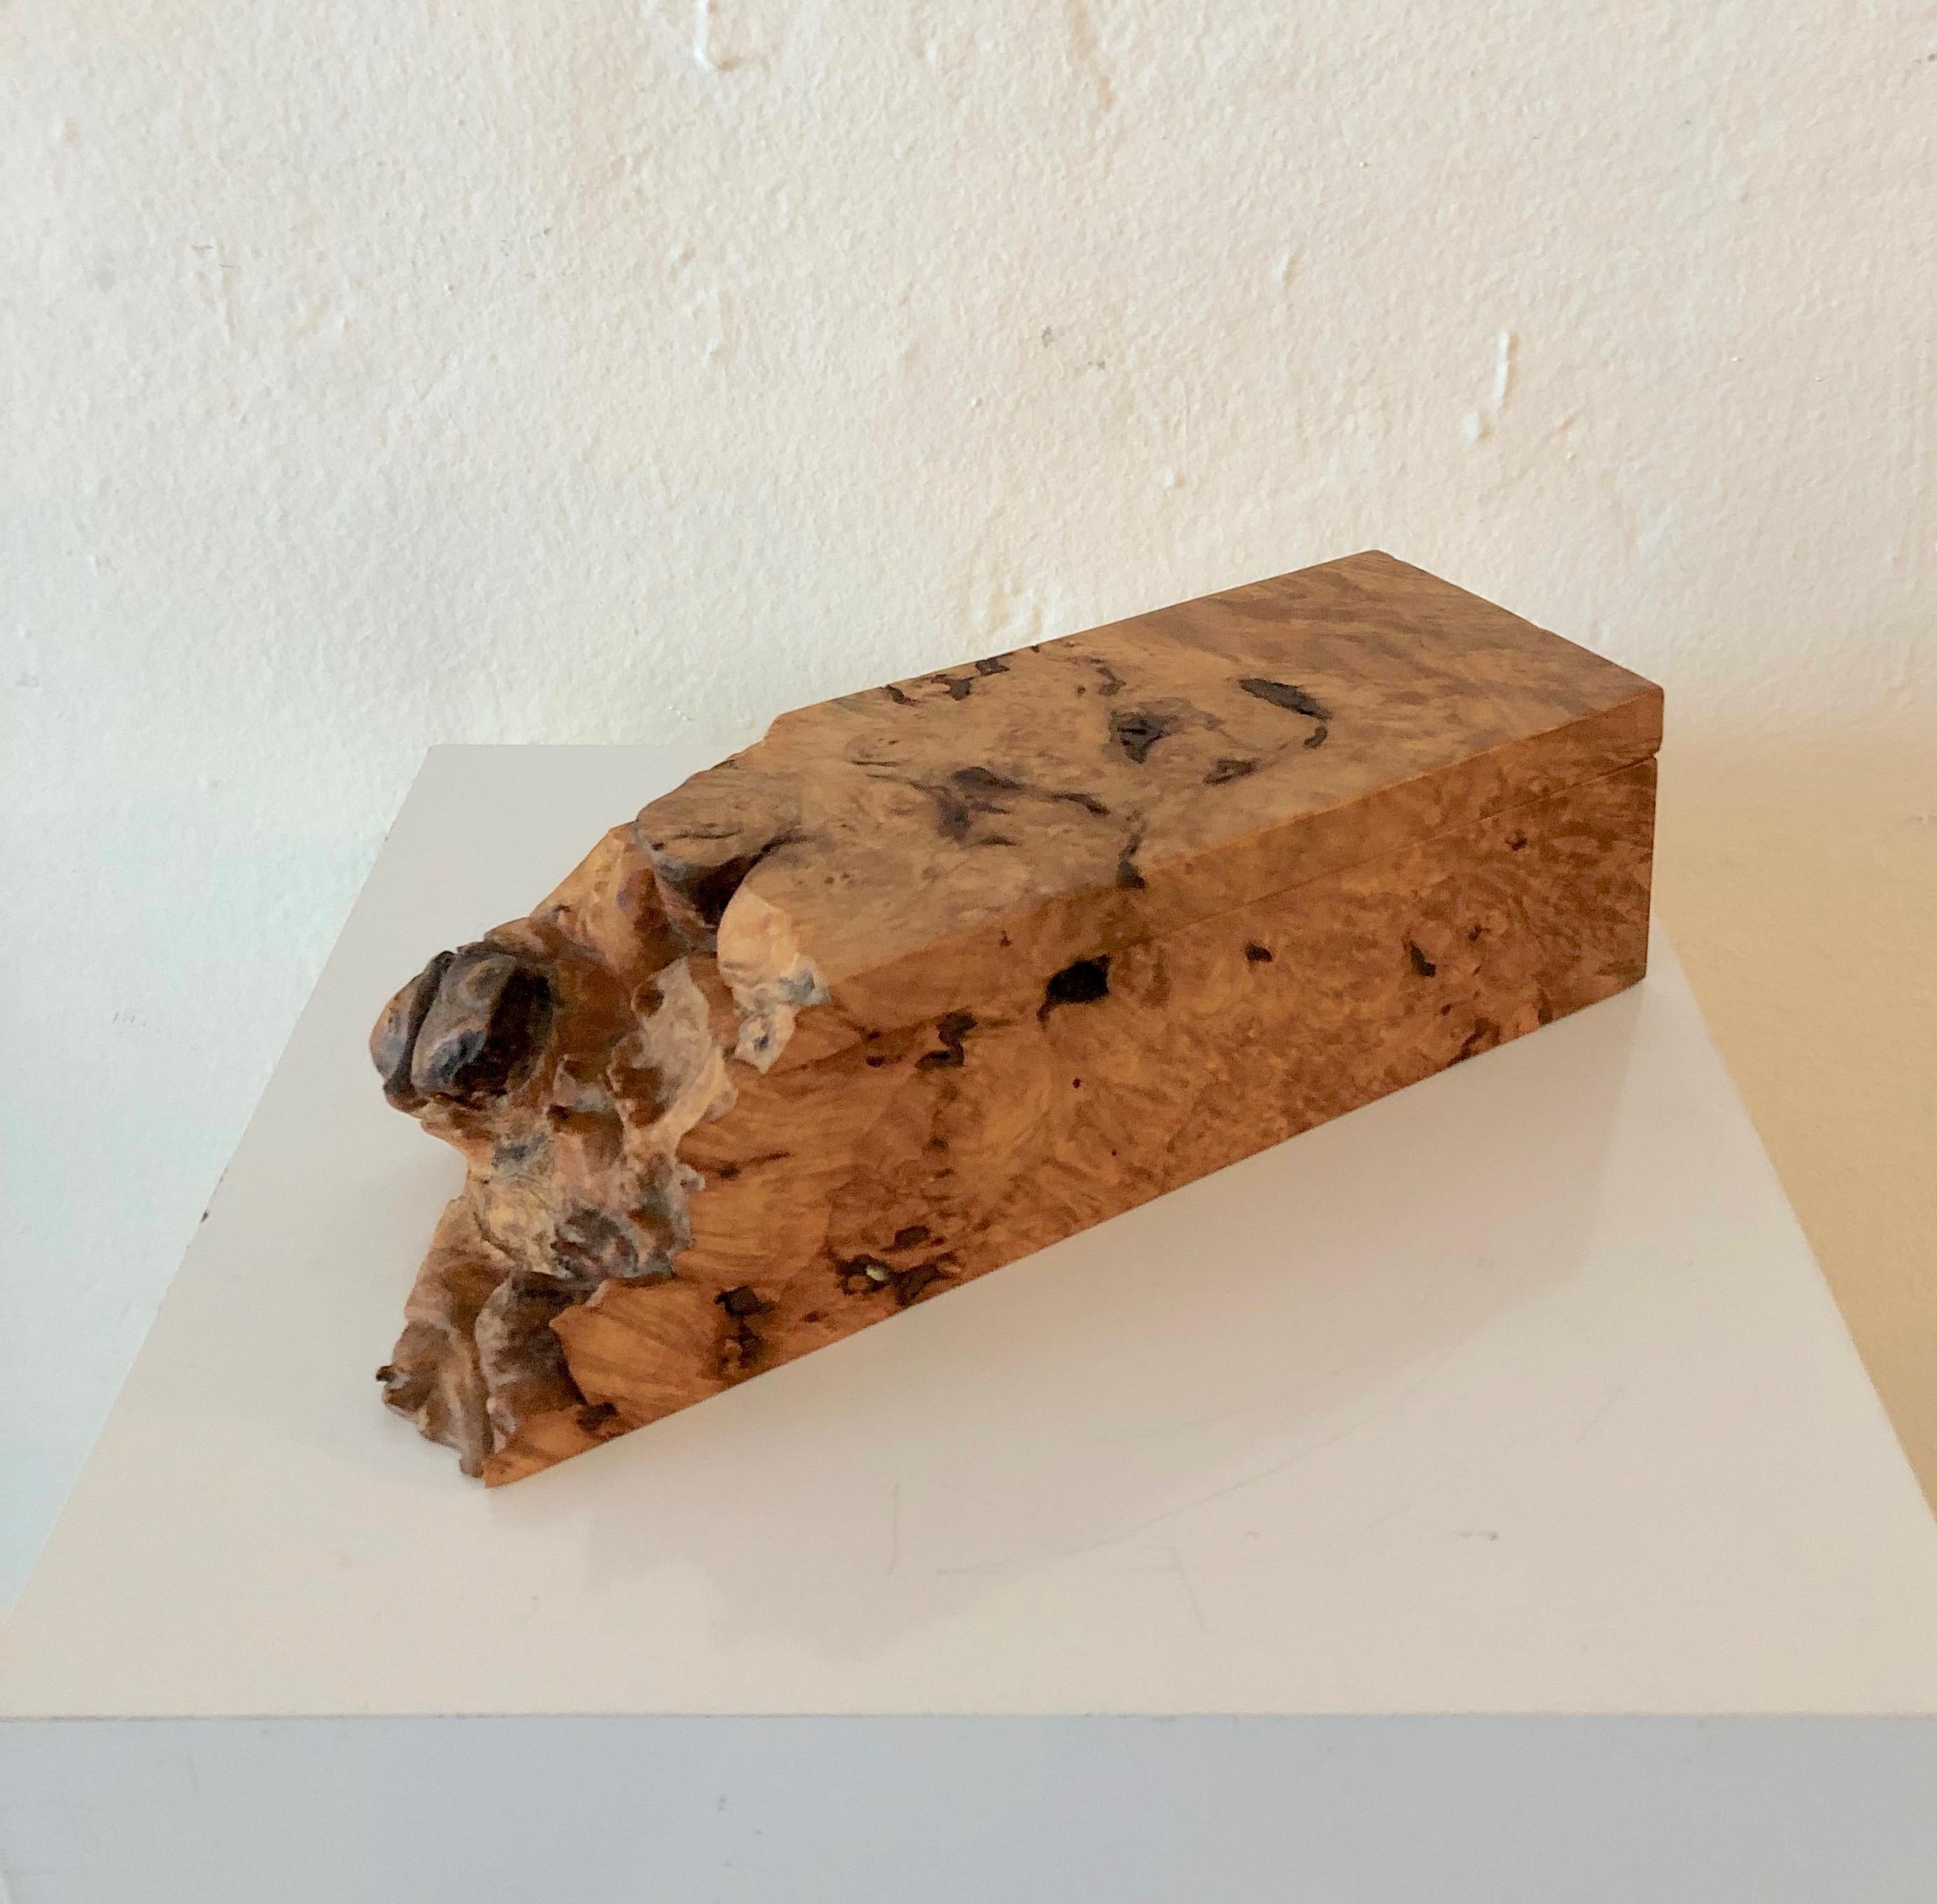 Crafted by master woodworker Michael Elkan this lidded box made of burl wood has a live edge left natural for an organic natural look which was a signature of his work. Michael Elkan boxes and wood work is collected and was so well regarded that